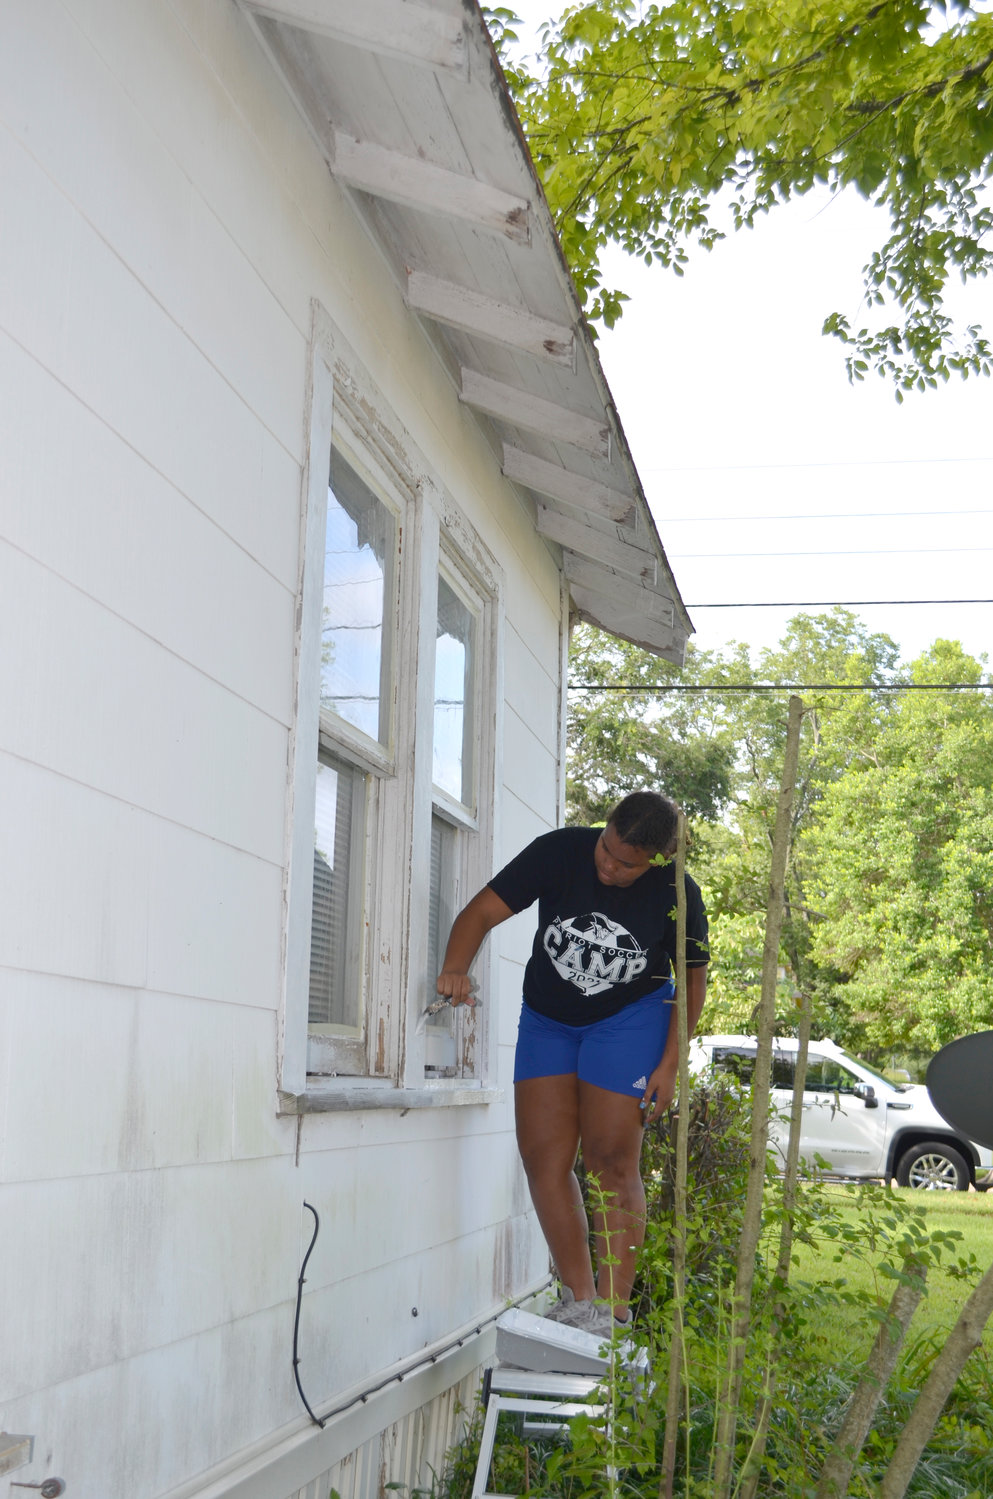 UM Army camper Violet Benjamin of Baytown paints the windows of a home in Mineola Friday. She and her team spent the week fixing up the house.